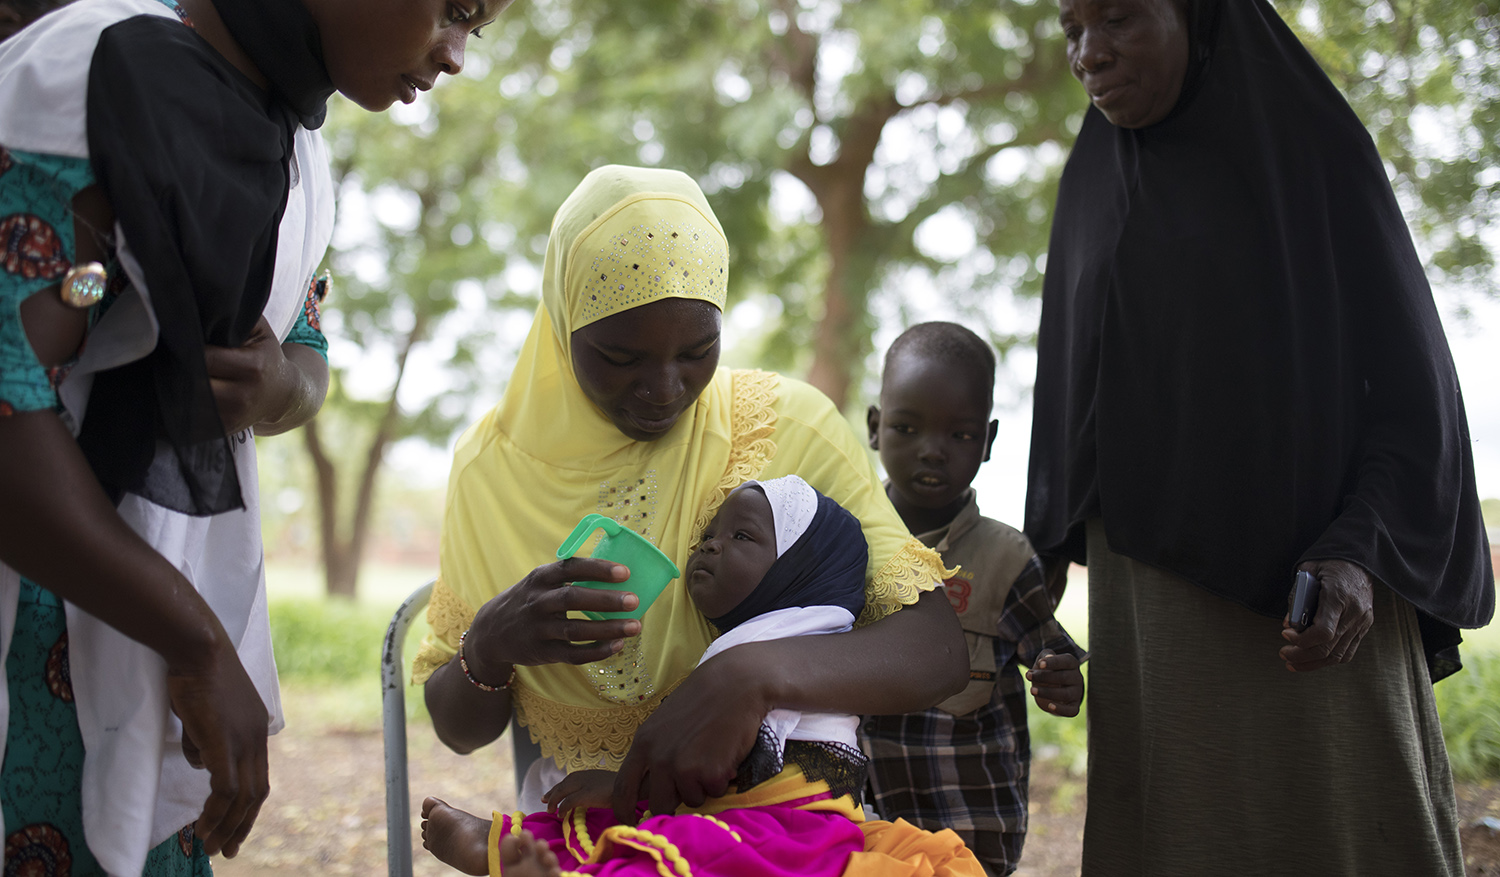 Mother receives anti-malaria drugs for her children in Zitenga, Burkina Faso on August 26, 2018. Photo: Dominic Chavez